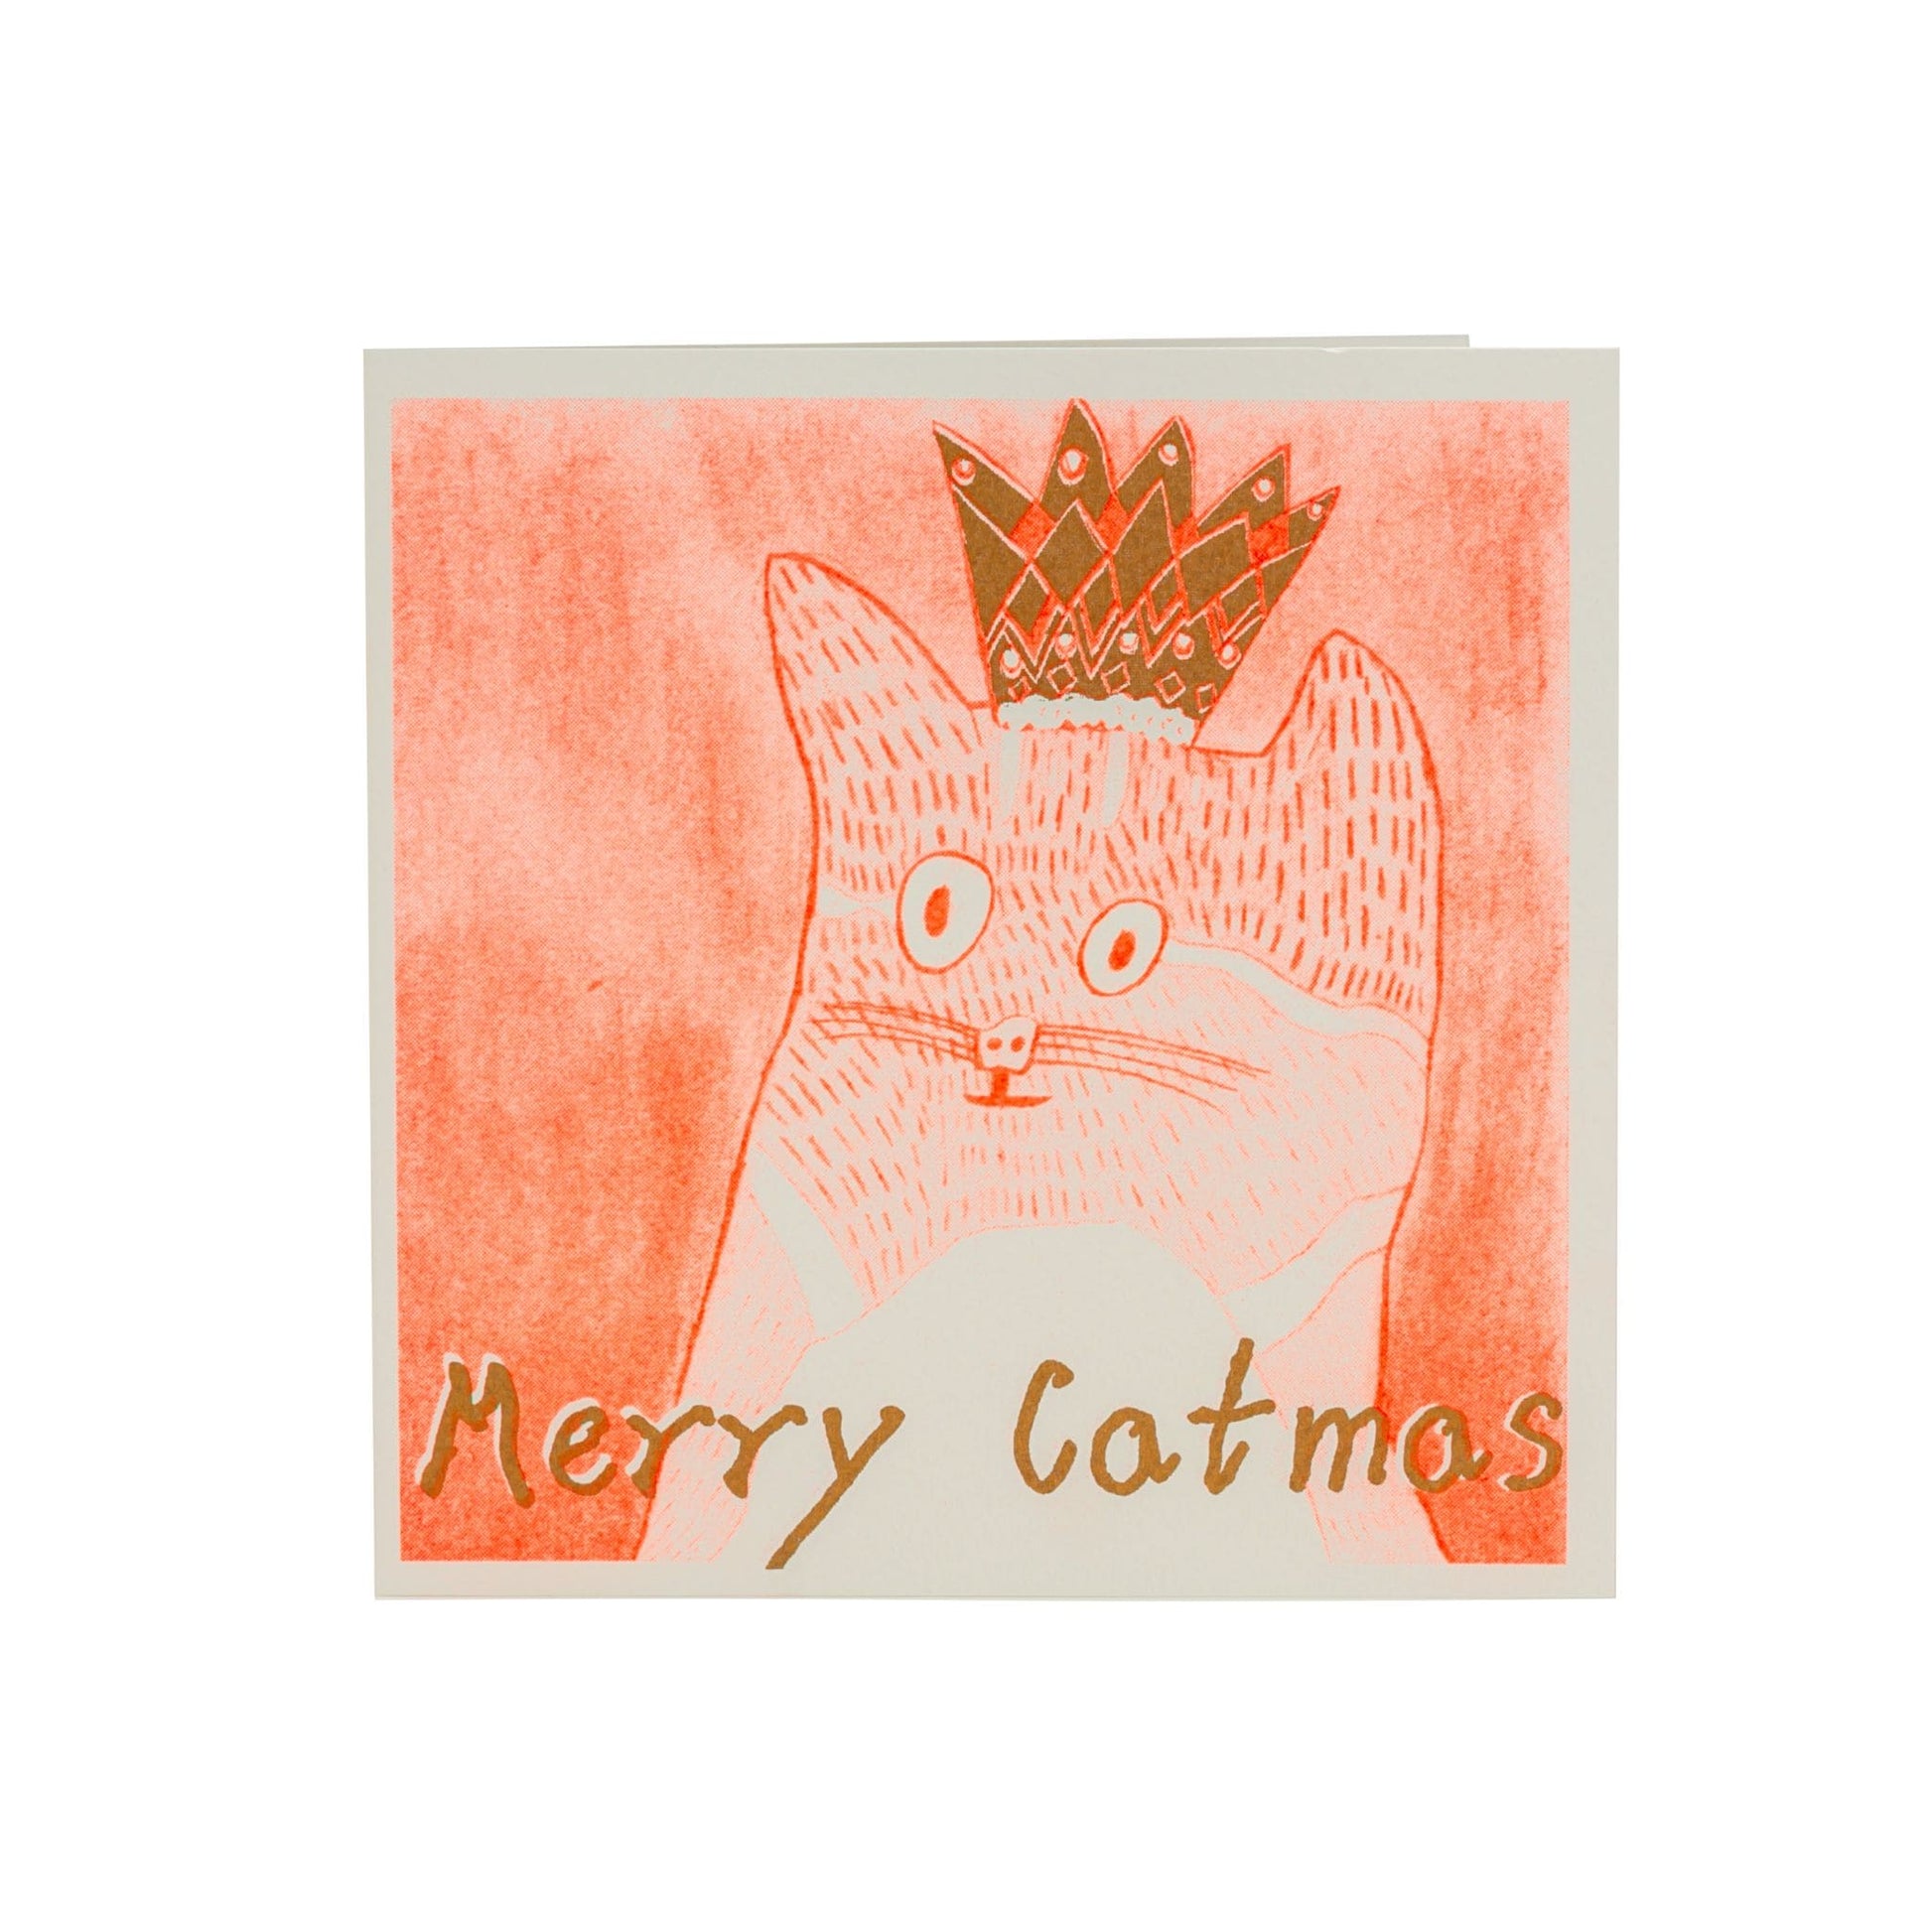 Merry Catmas recycled Christmas card from ARTHOUSE Unlimited